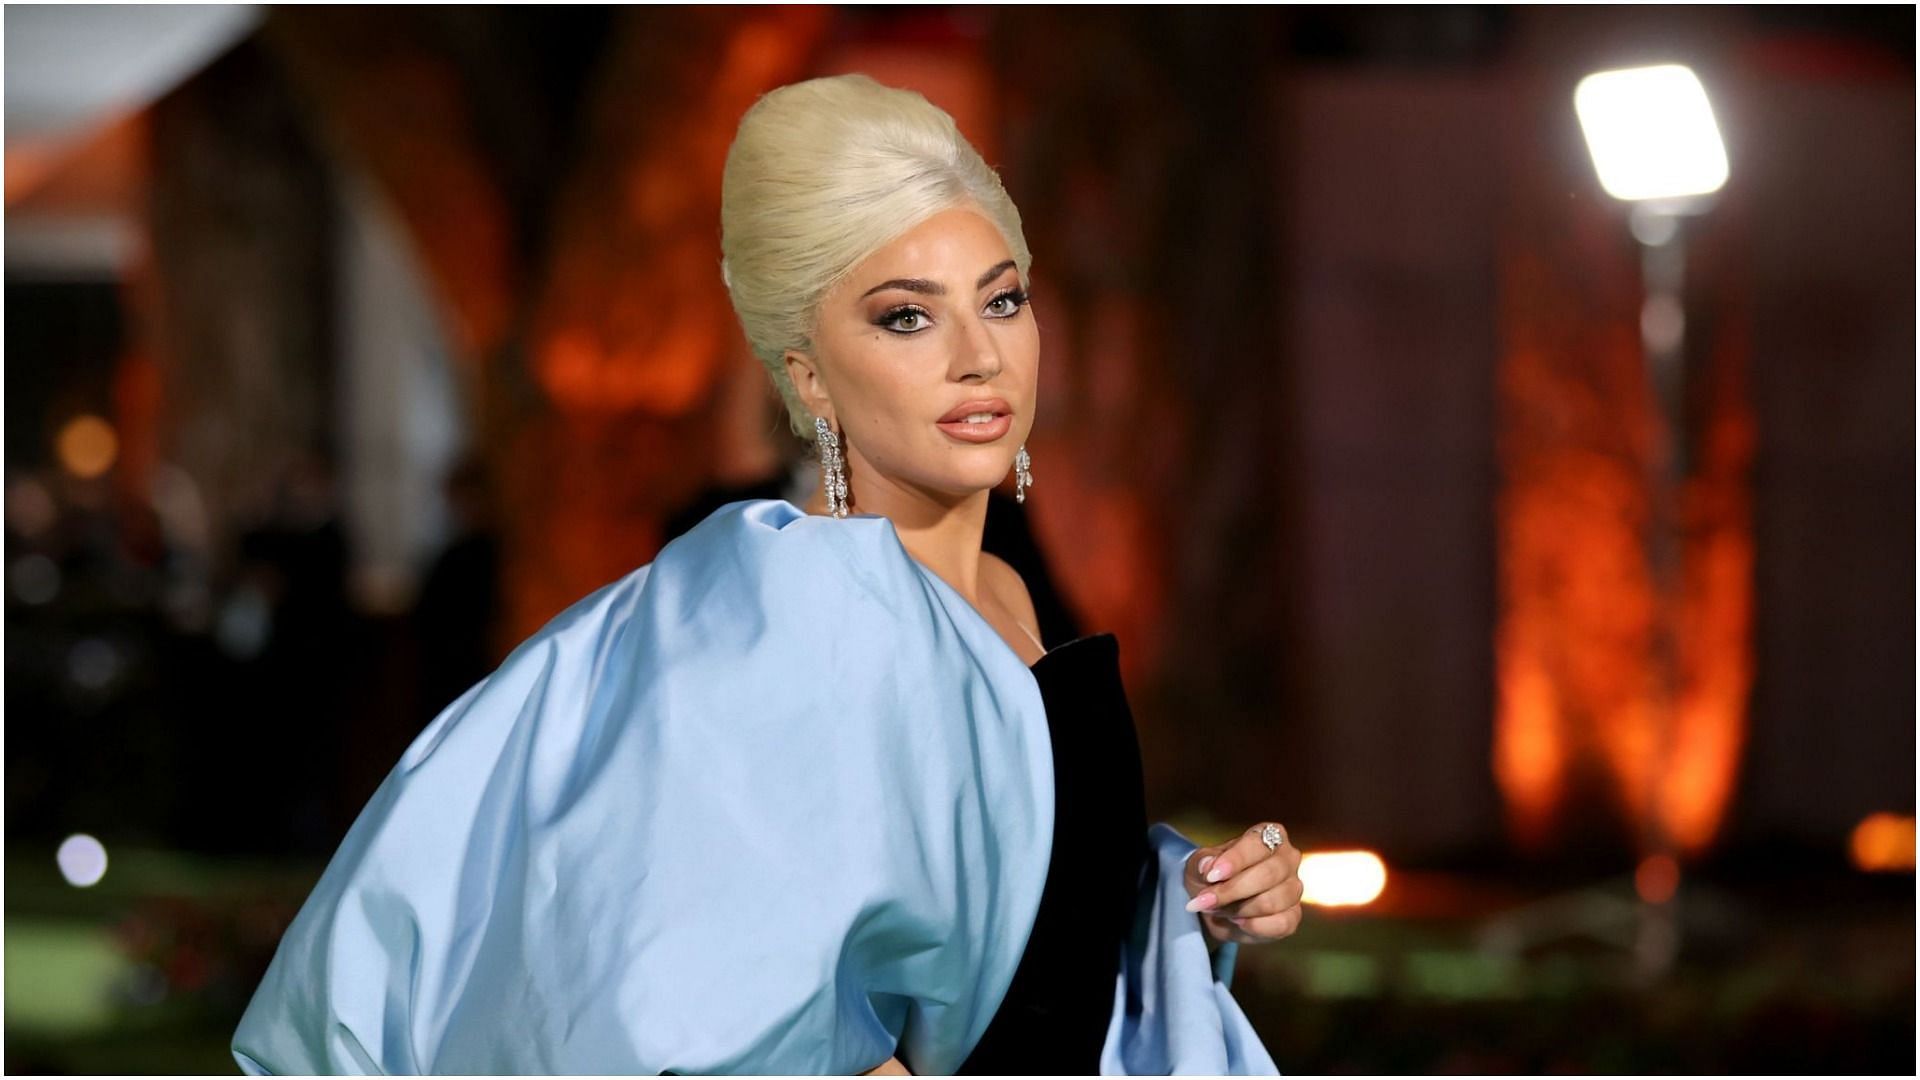 Lady Gaga attends The Academy Museum of Motion Pictures Opening Gala (Image via Getty Images)